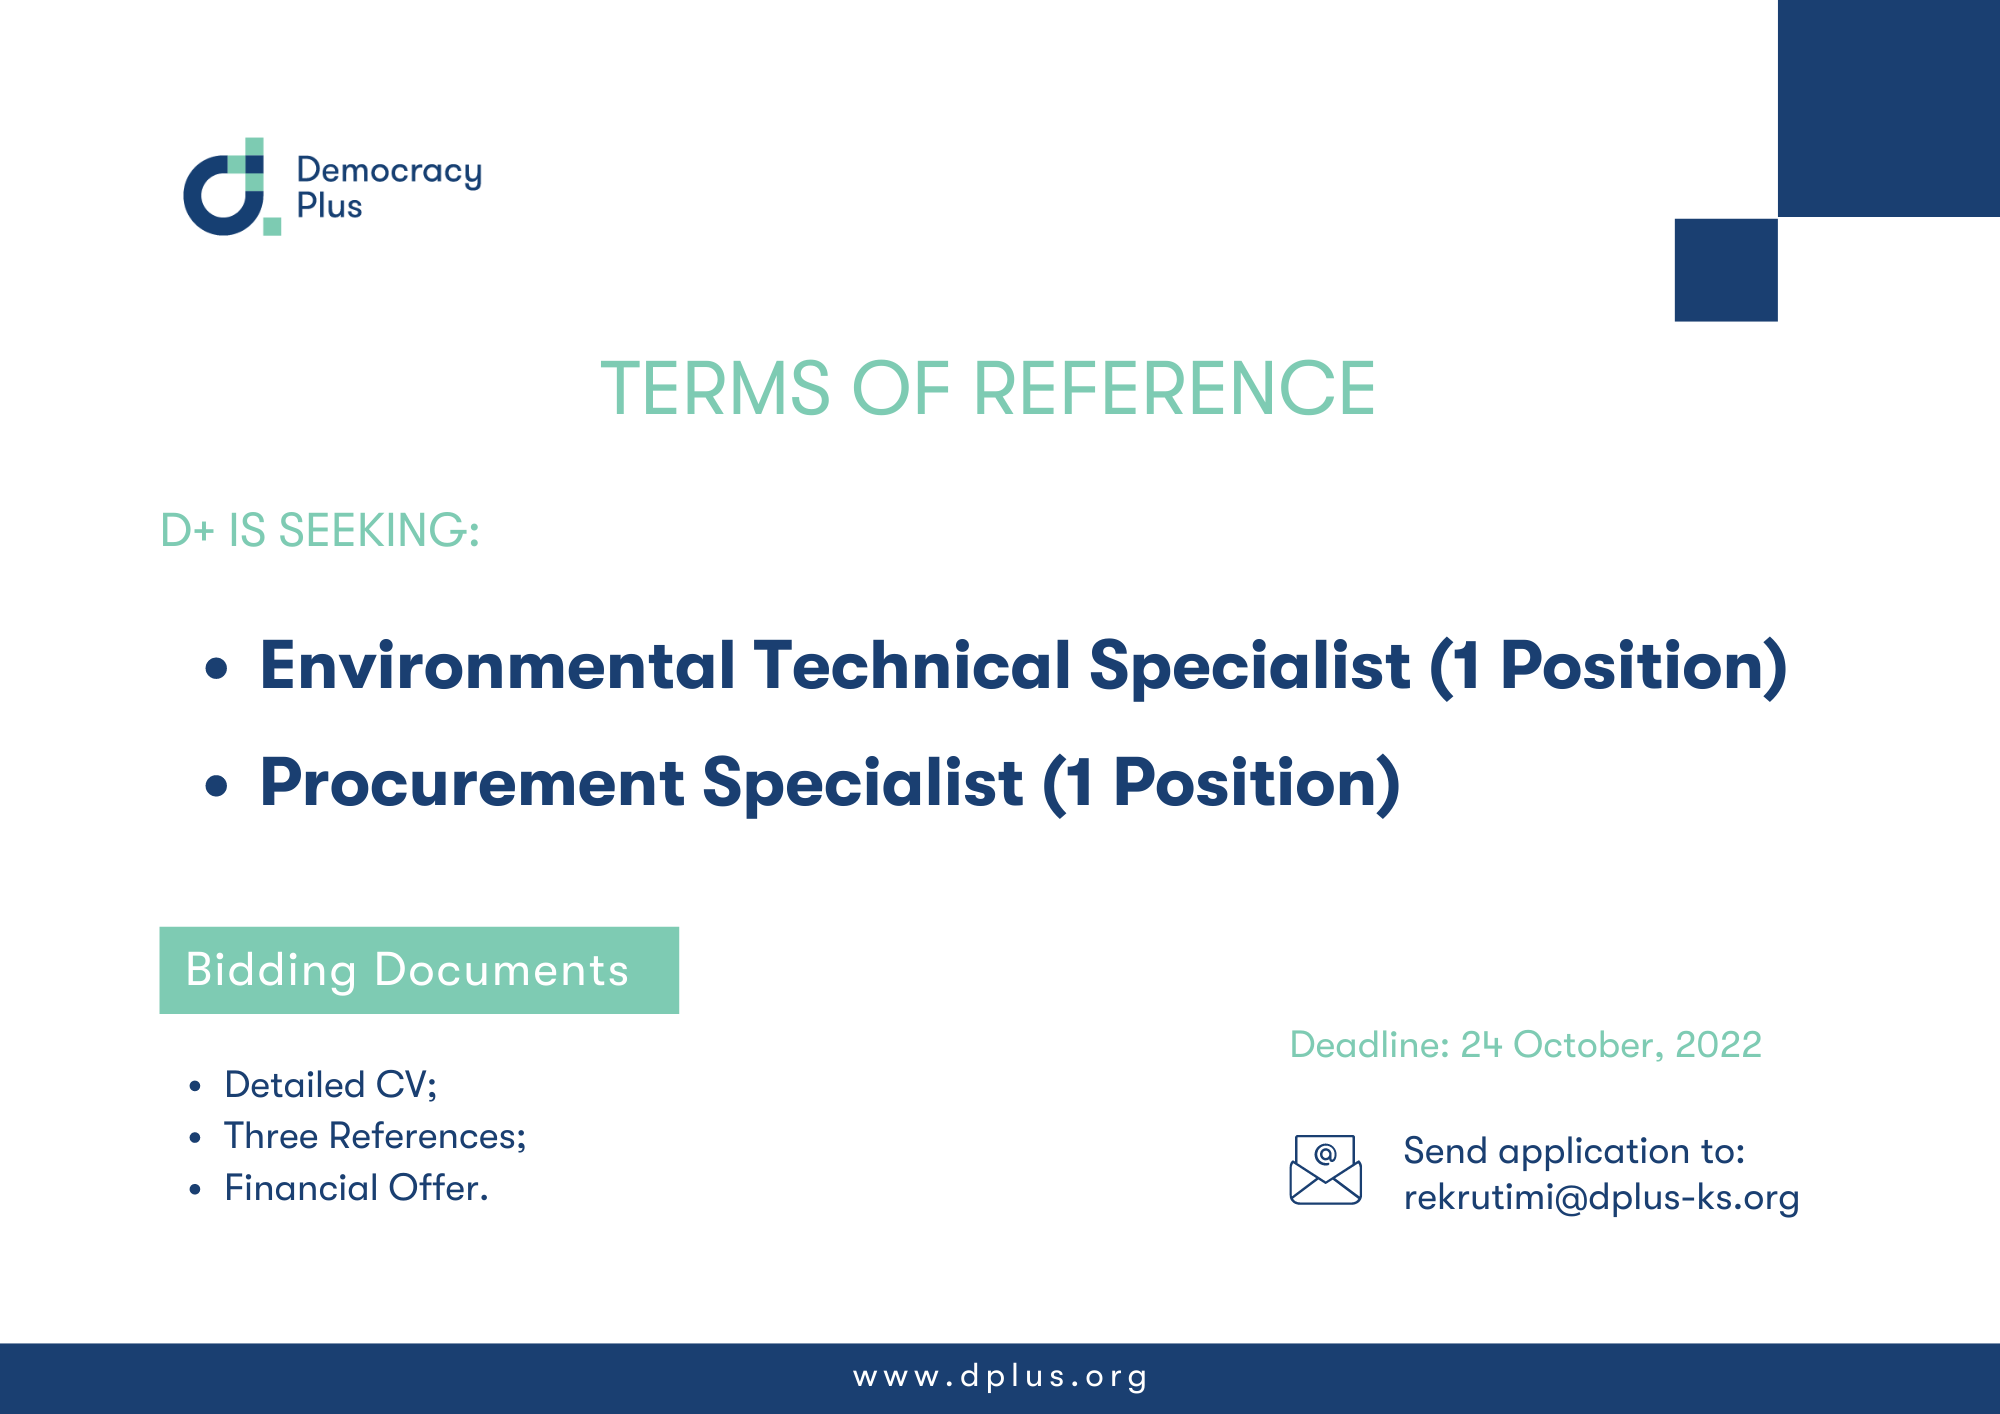 Terms of Reference for Procurement Specialist and Environmental Specialist